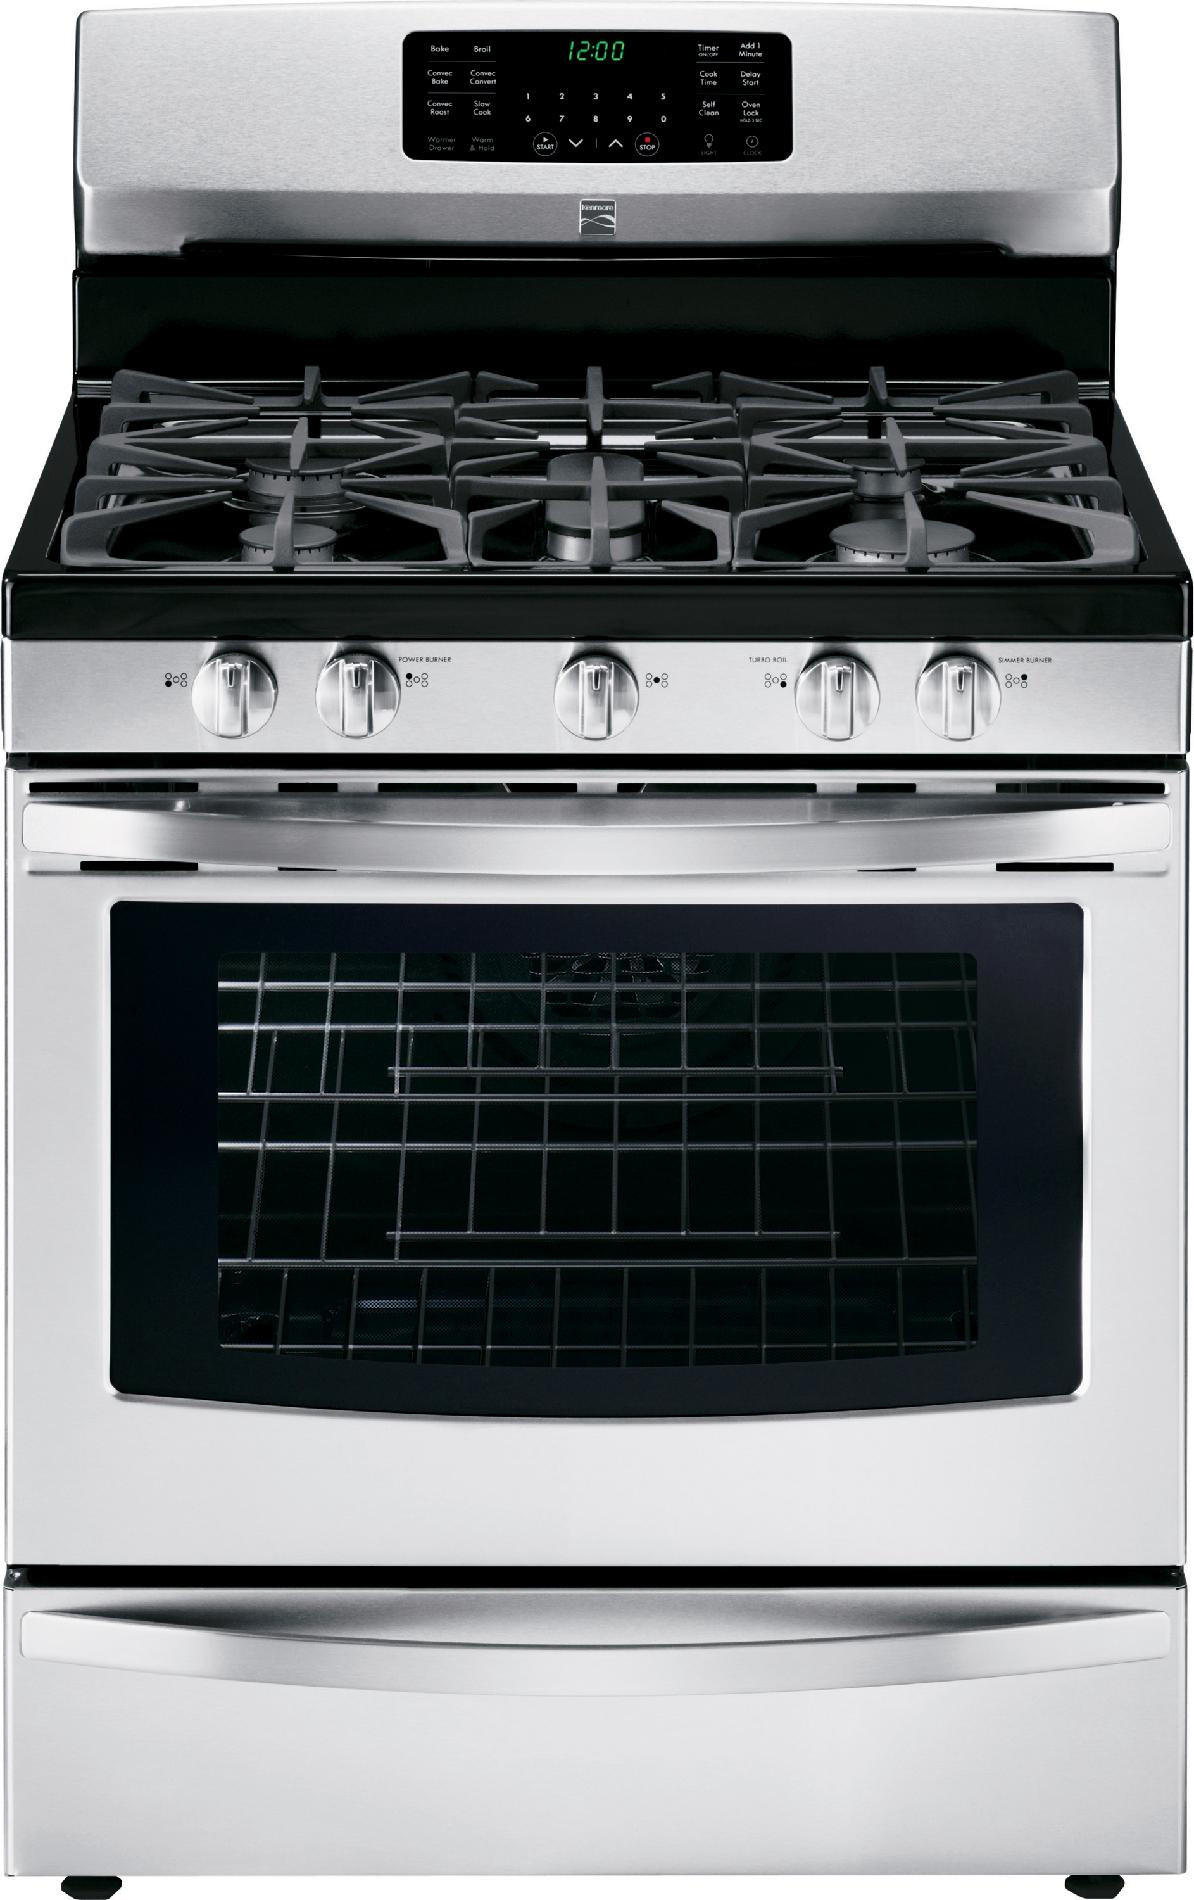 Kenmore 30 Freestanding Gas Range w/ Convection Oven - Stainless Steel